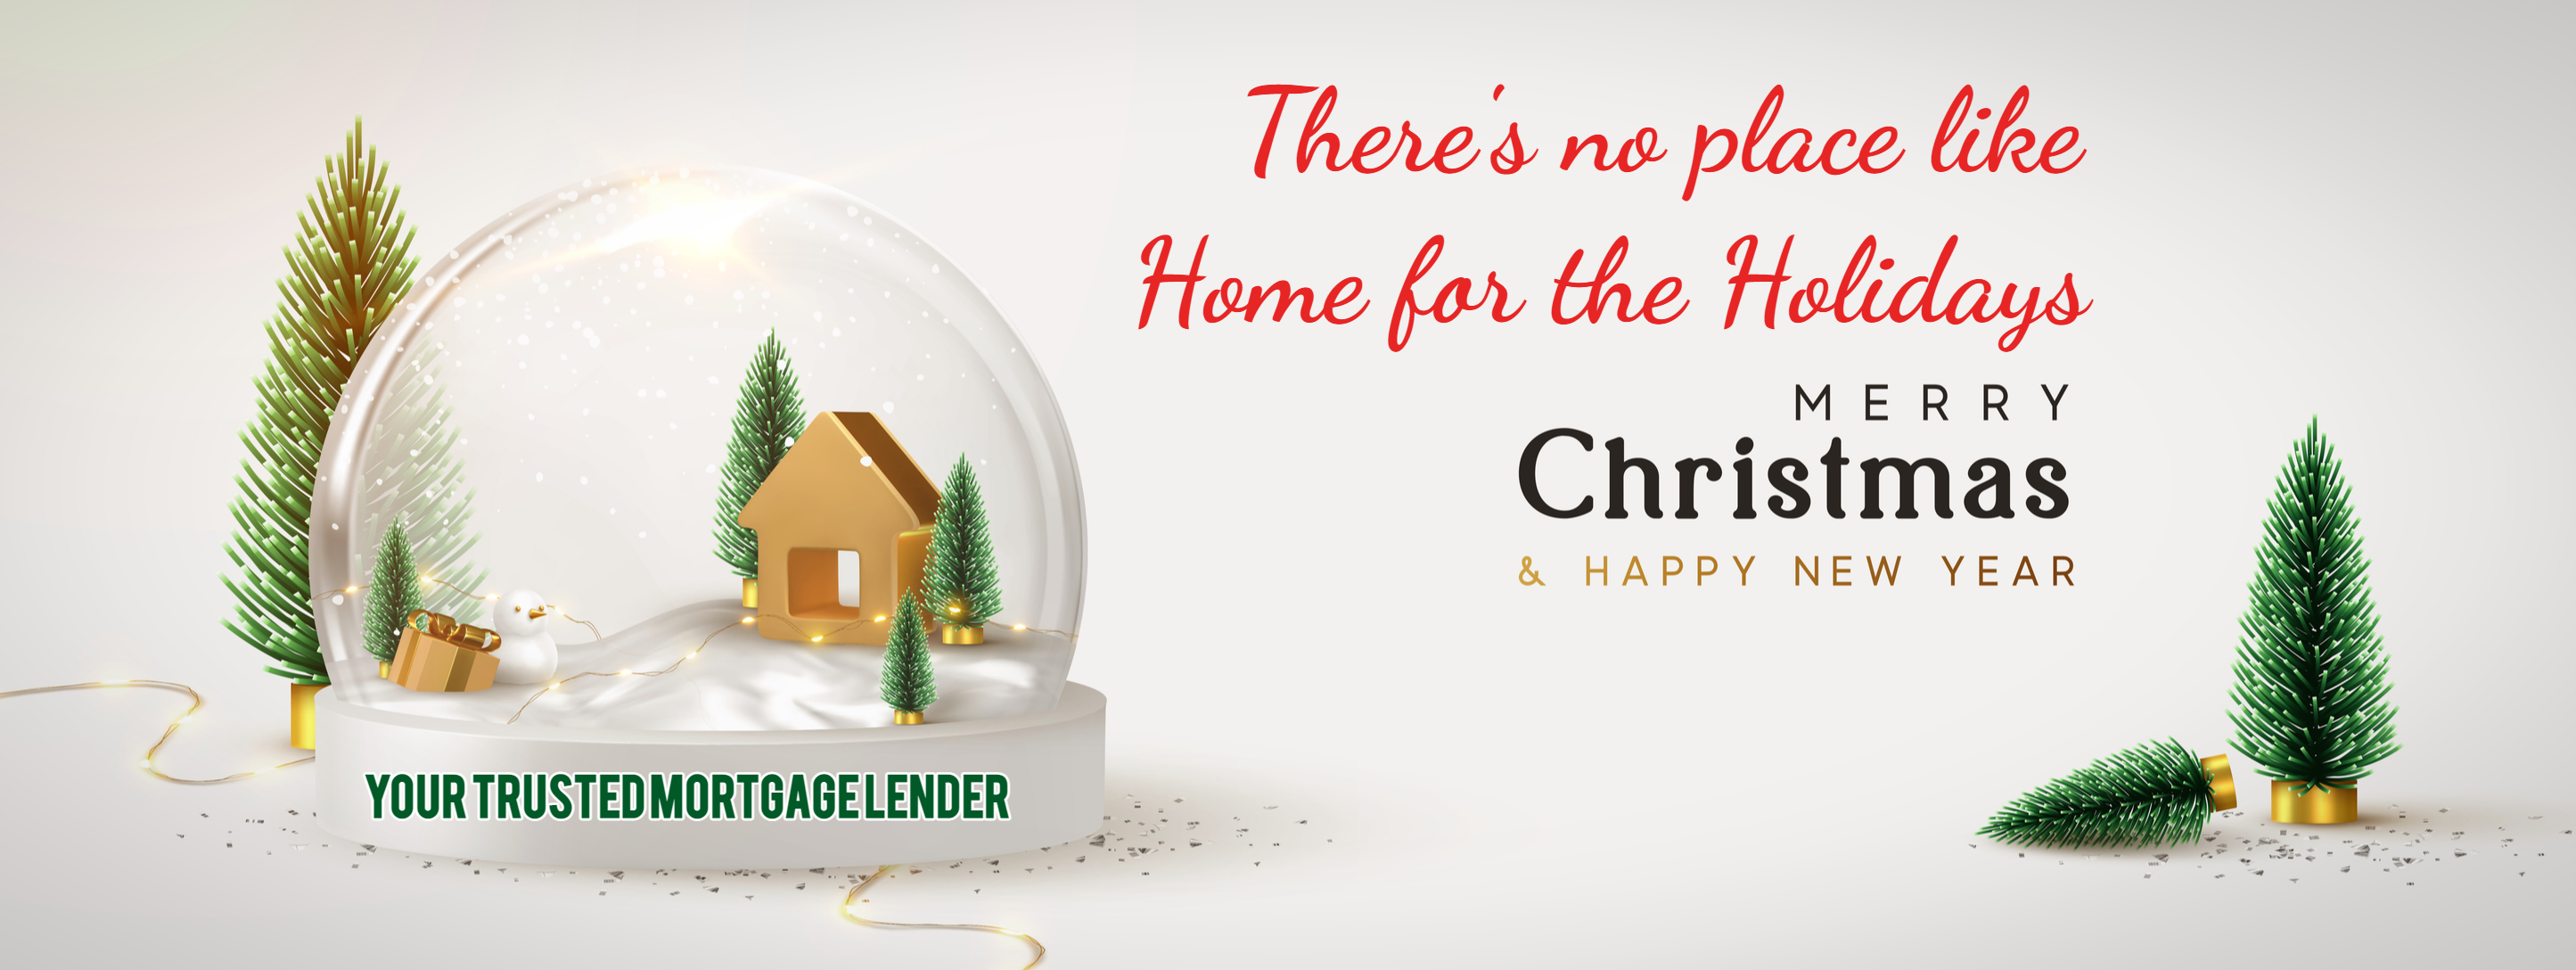 There's no place like home for the holidays Merry Christmas & Happy New Year Your trusted mortgage lender